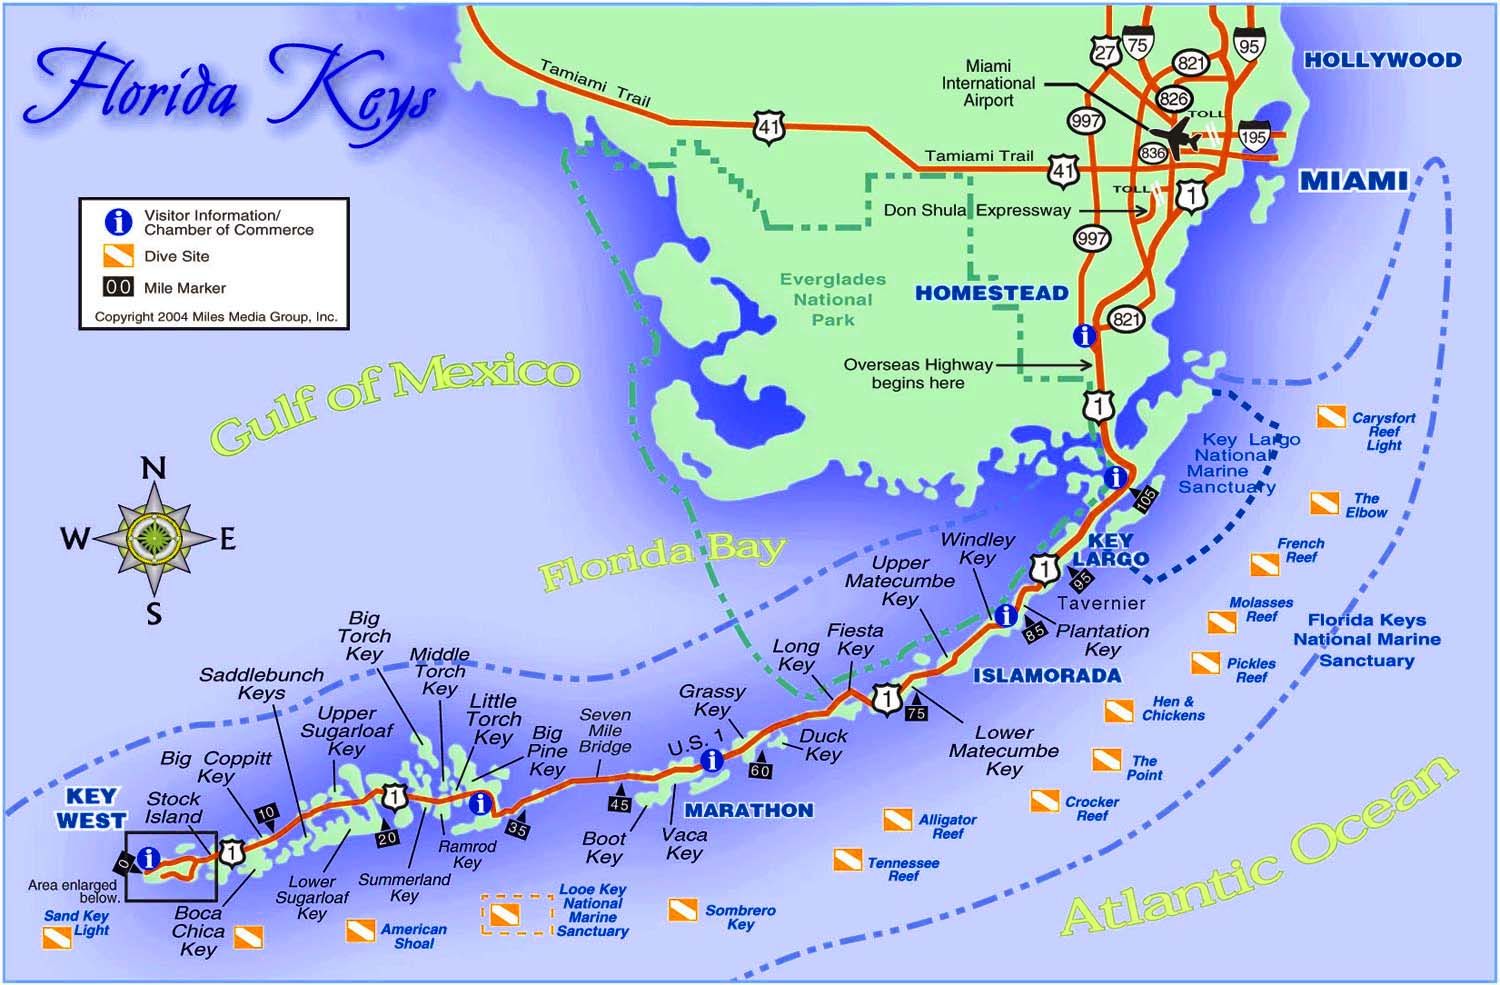 Best Florida Keys Beaches Map And Information - Florida Keys - Florida Keys Snorkeling Map